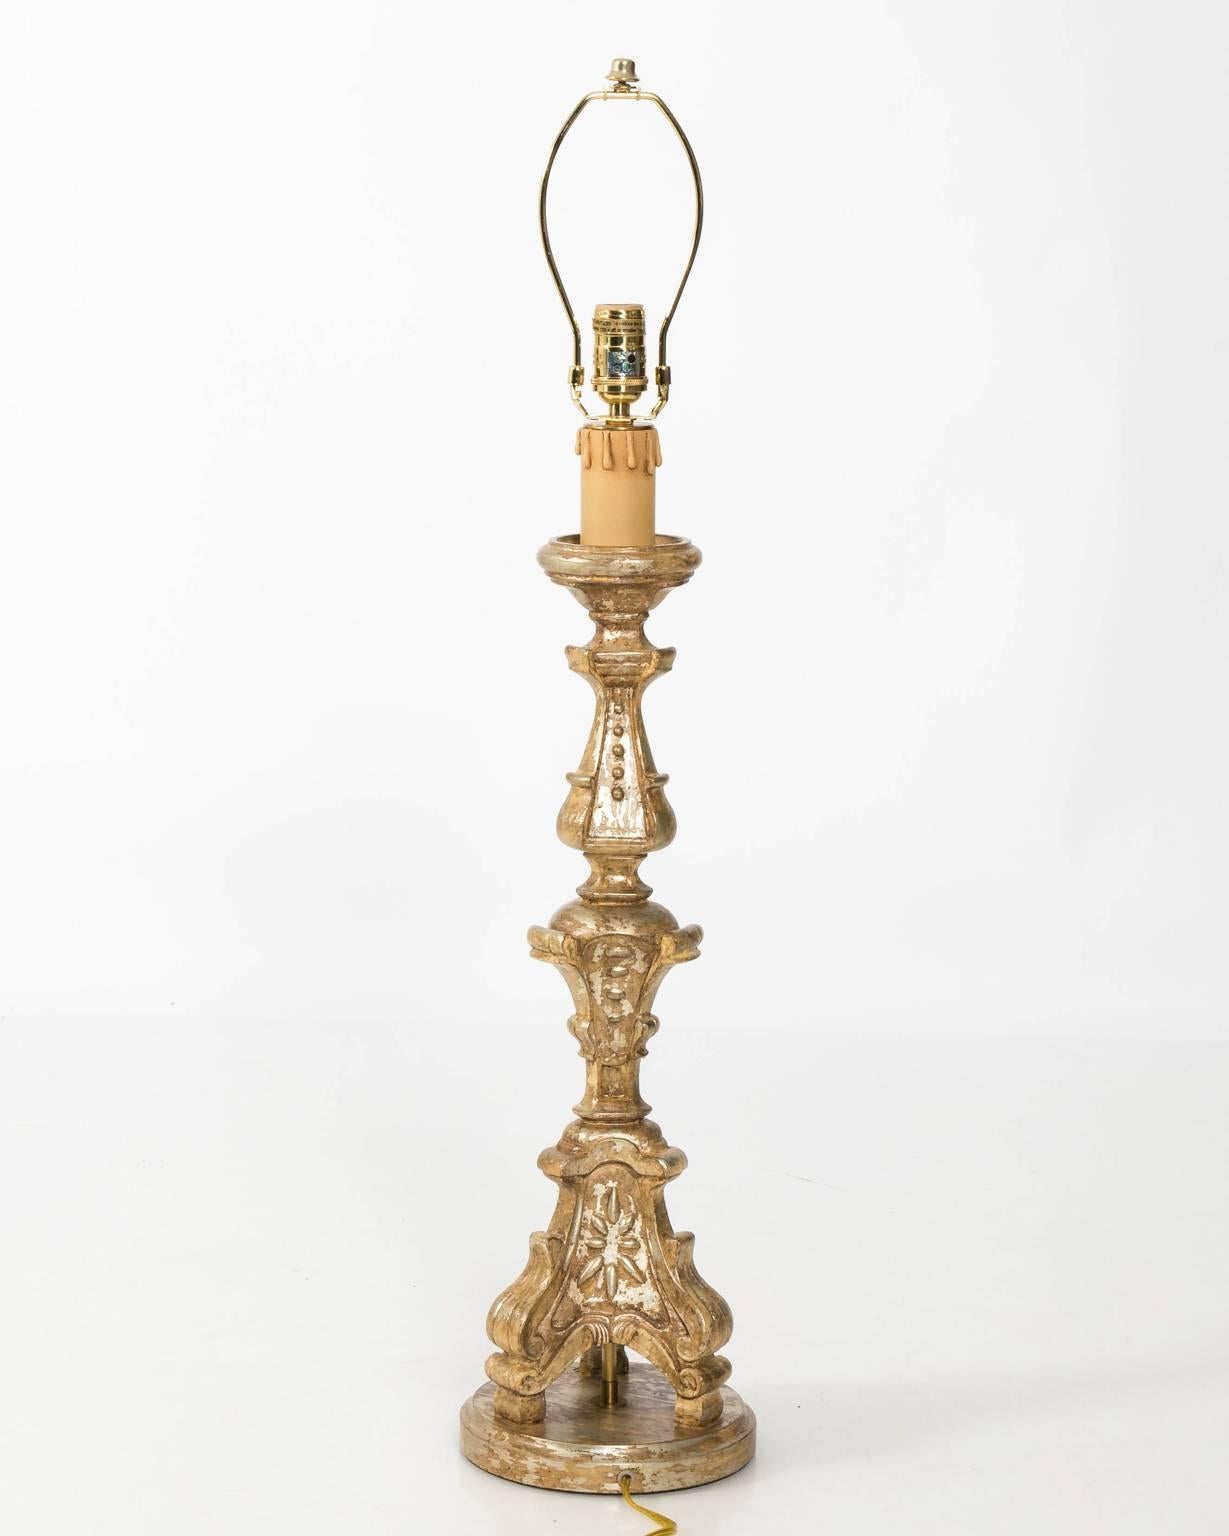 Gilt Pair of Gilded Candlestick Lamps